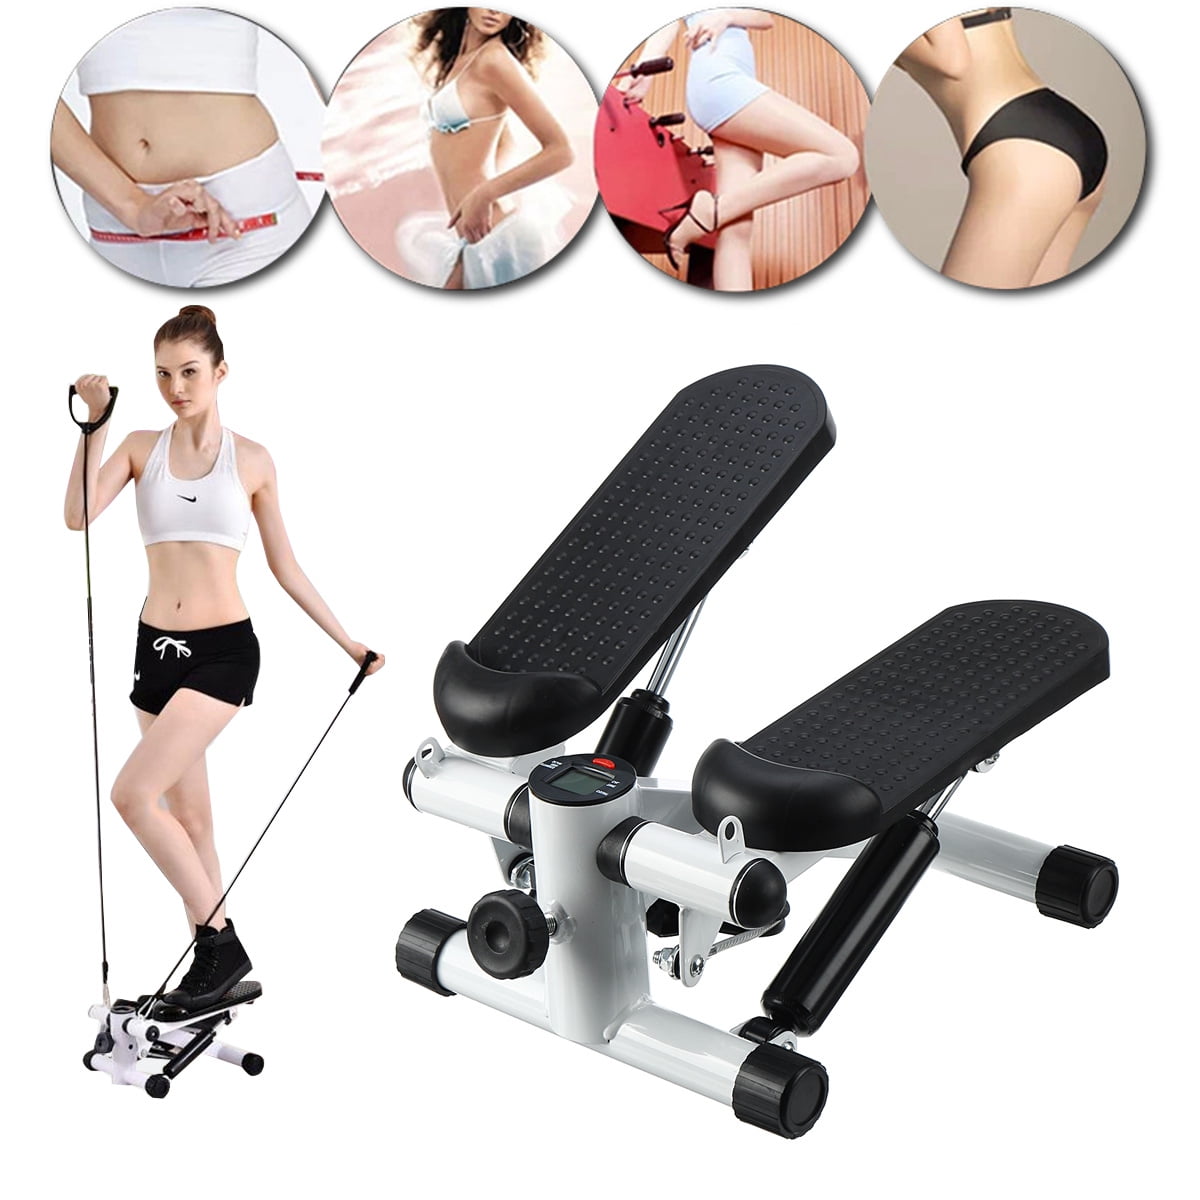 Mini Stepper Exercise Machine Fitness Home Gym Resistance Band Cardio UK Stock